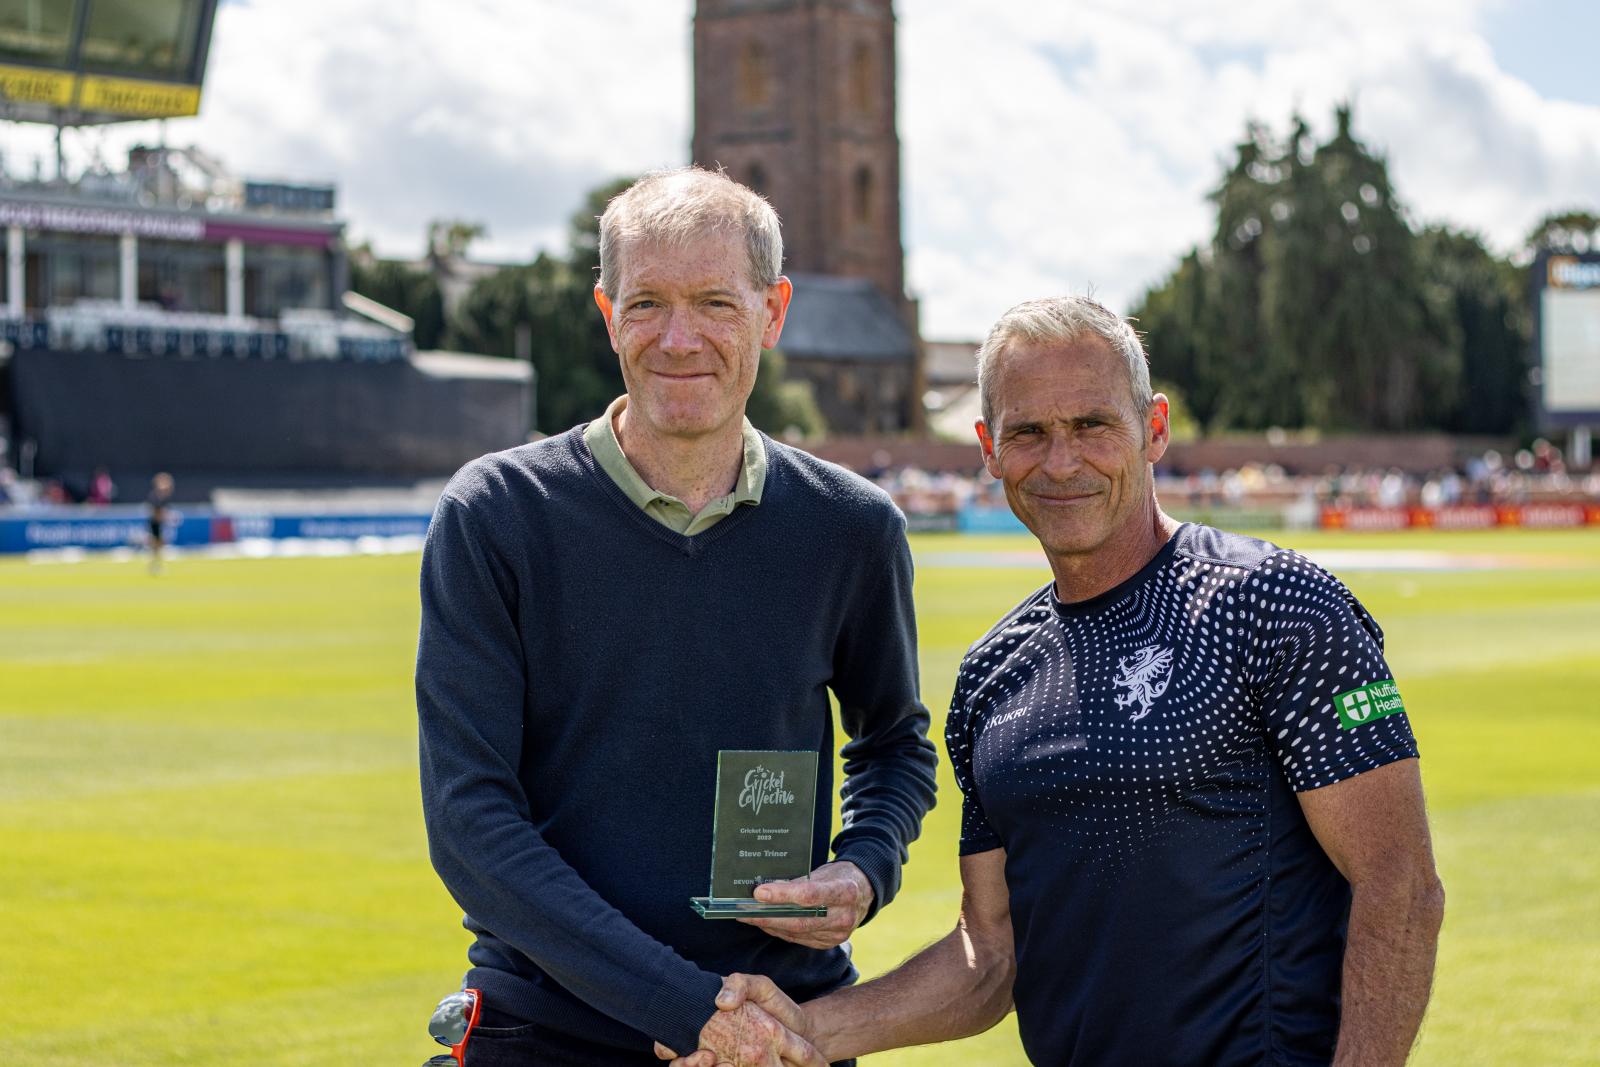 Steve Triner receives his award at the Cooper Associates County Ground.